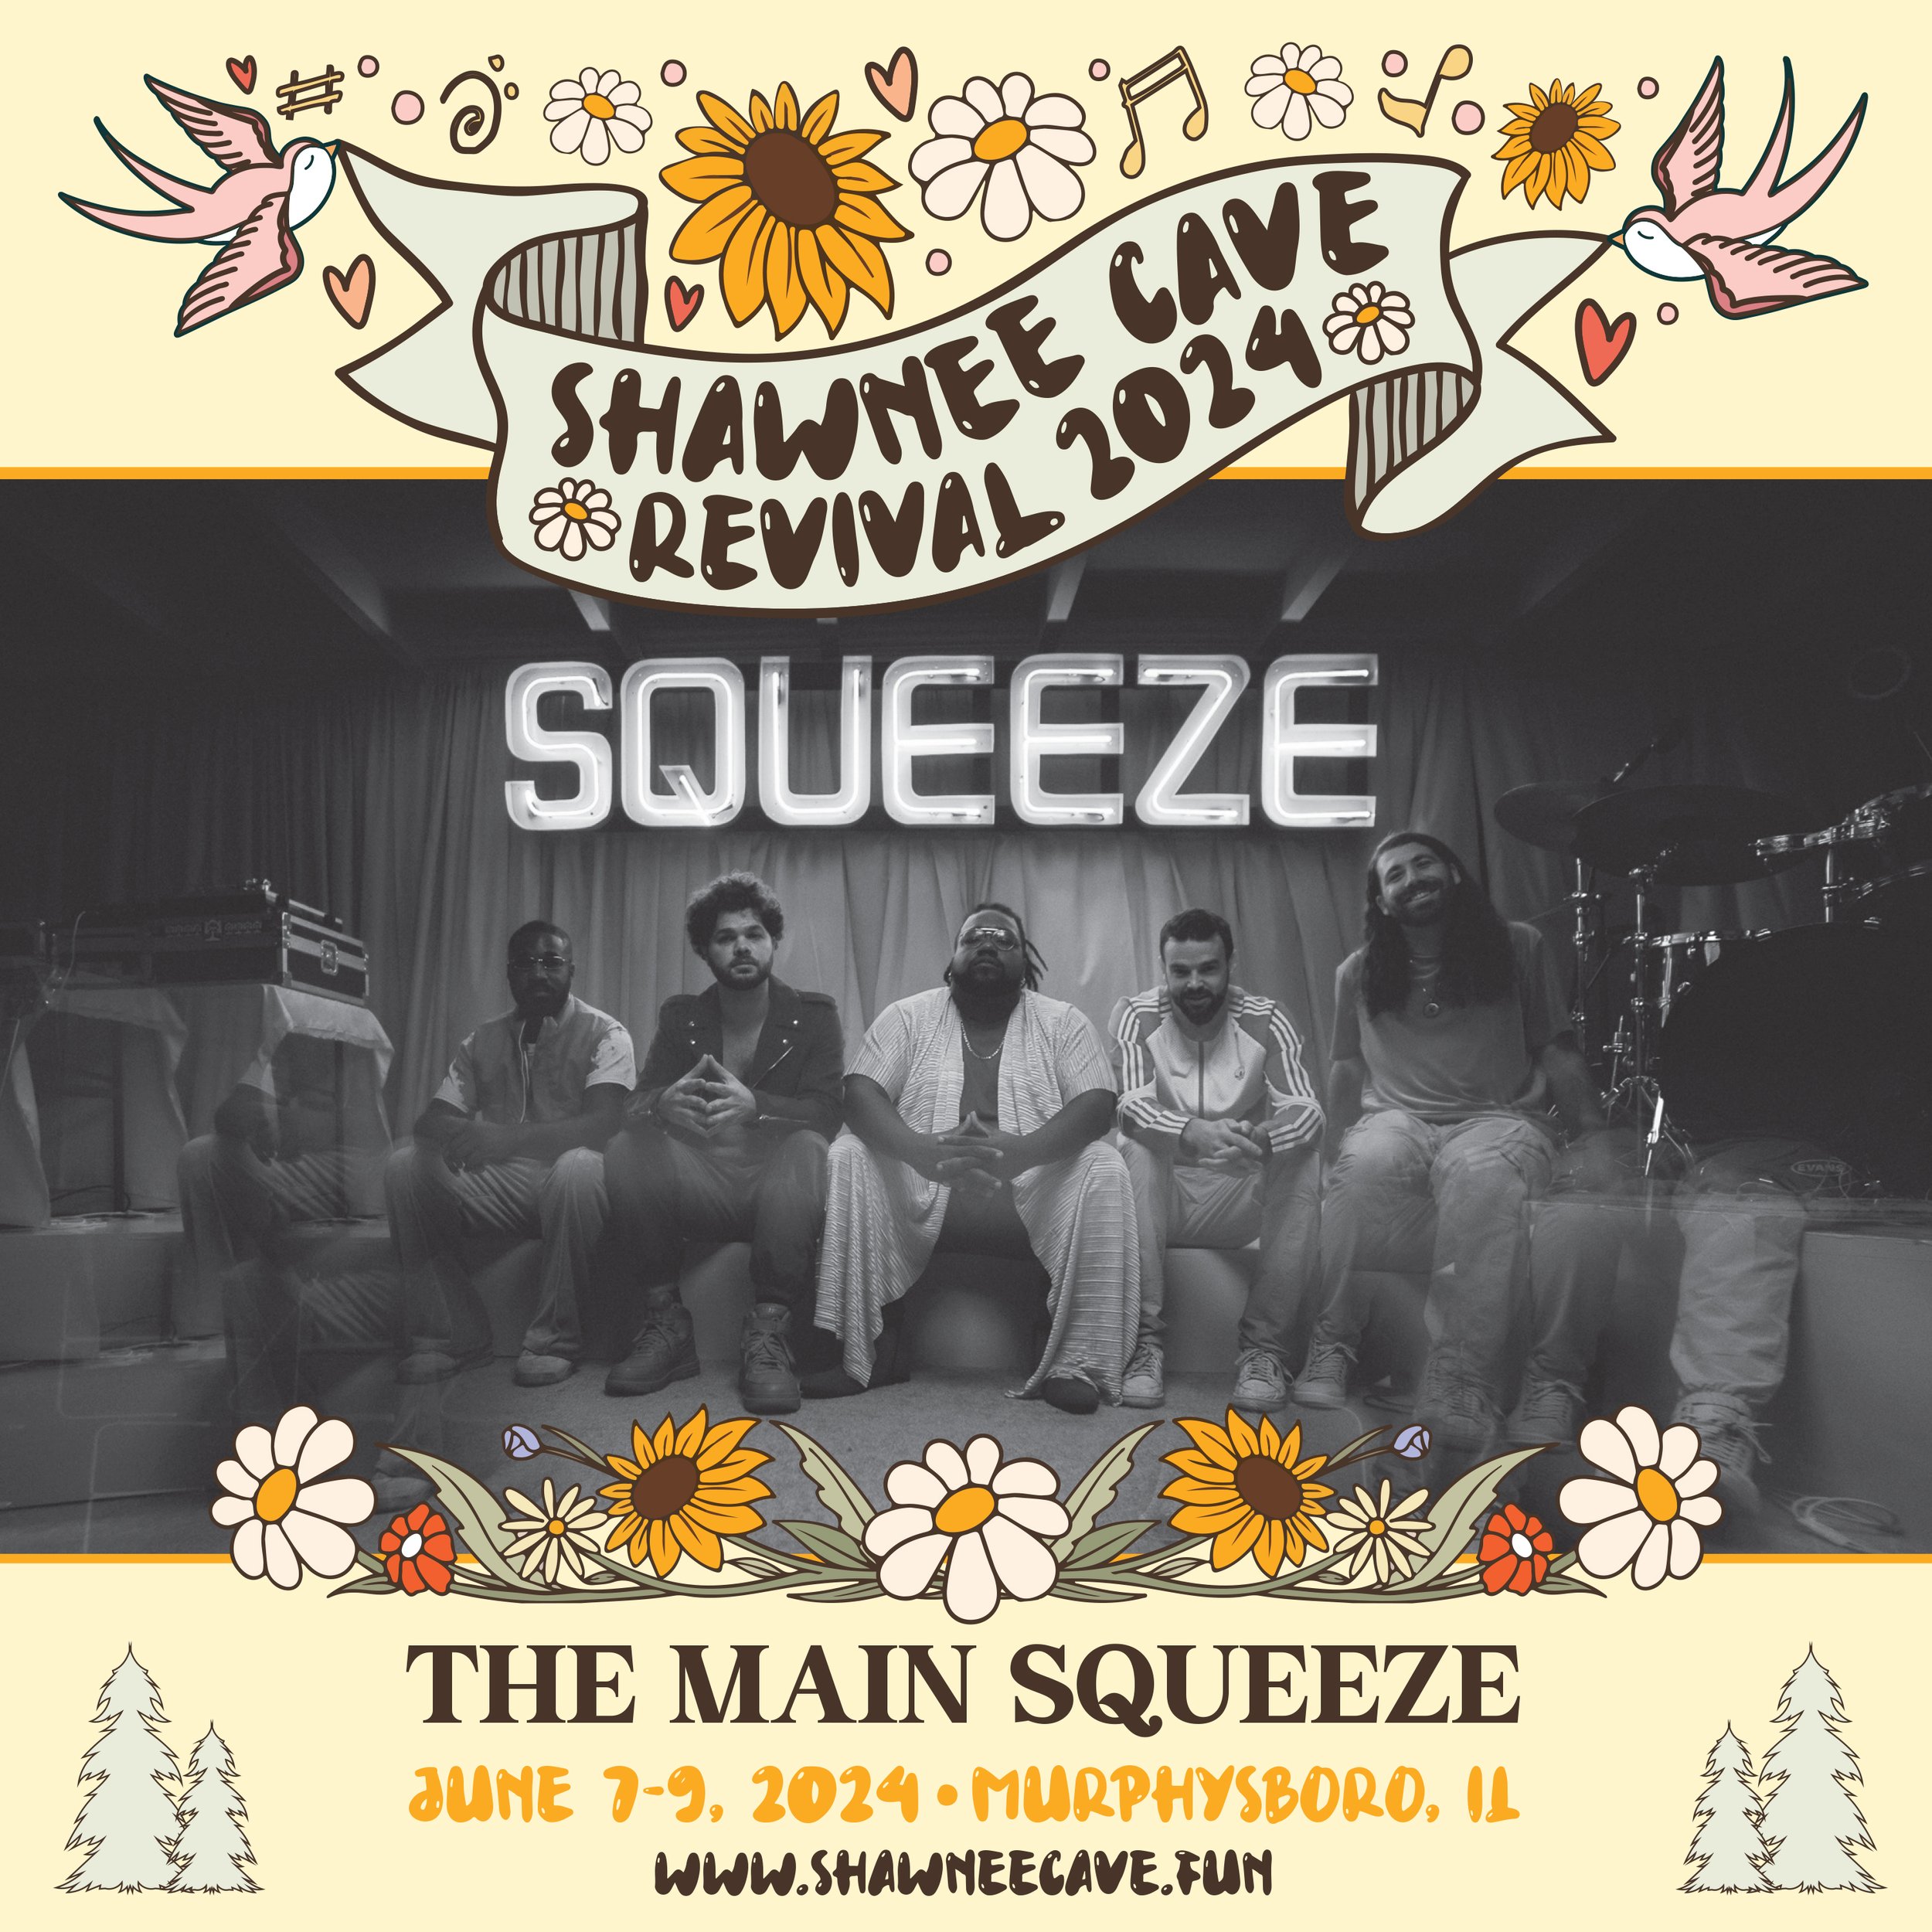 The Main Squeeze - Shawnee Cave Revival.jpg